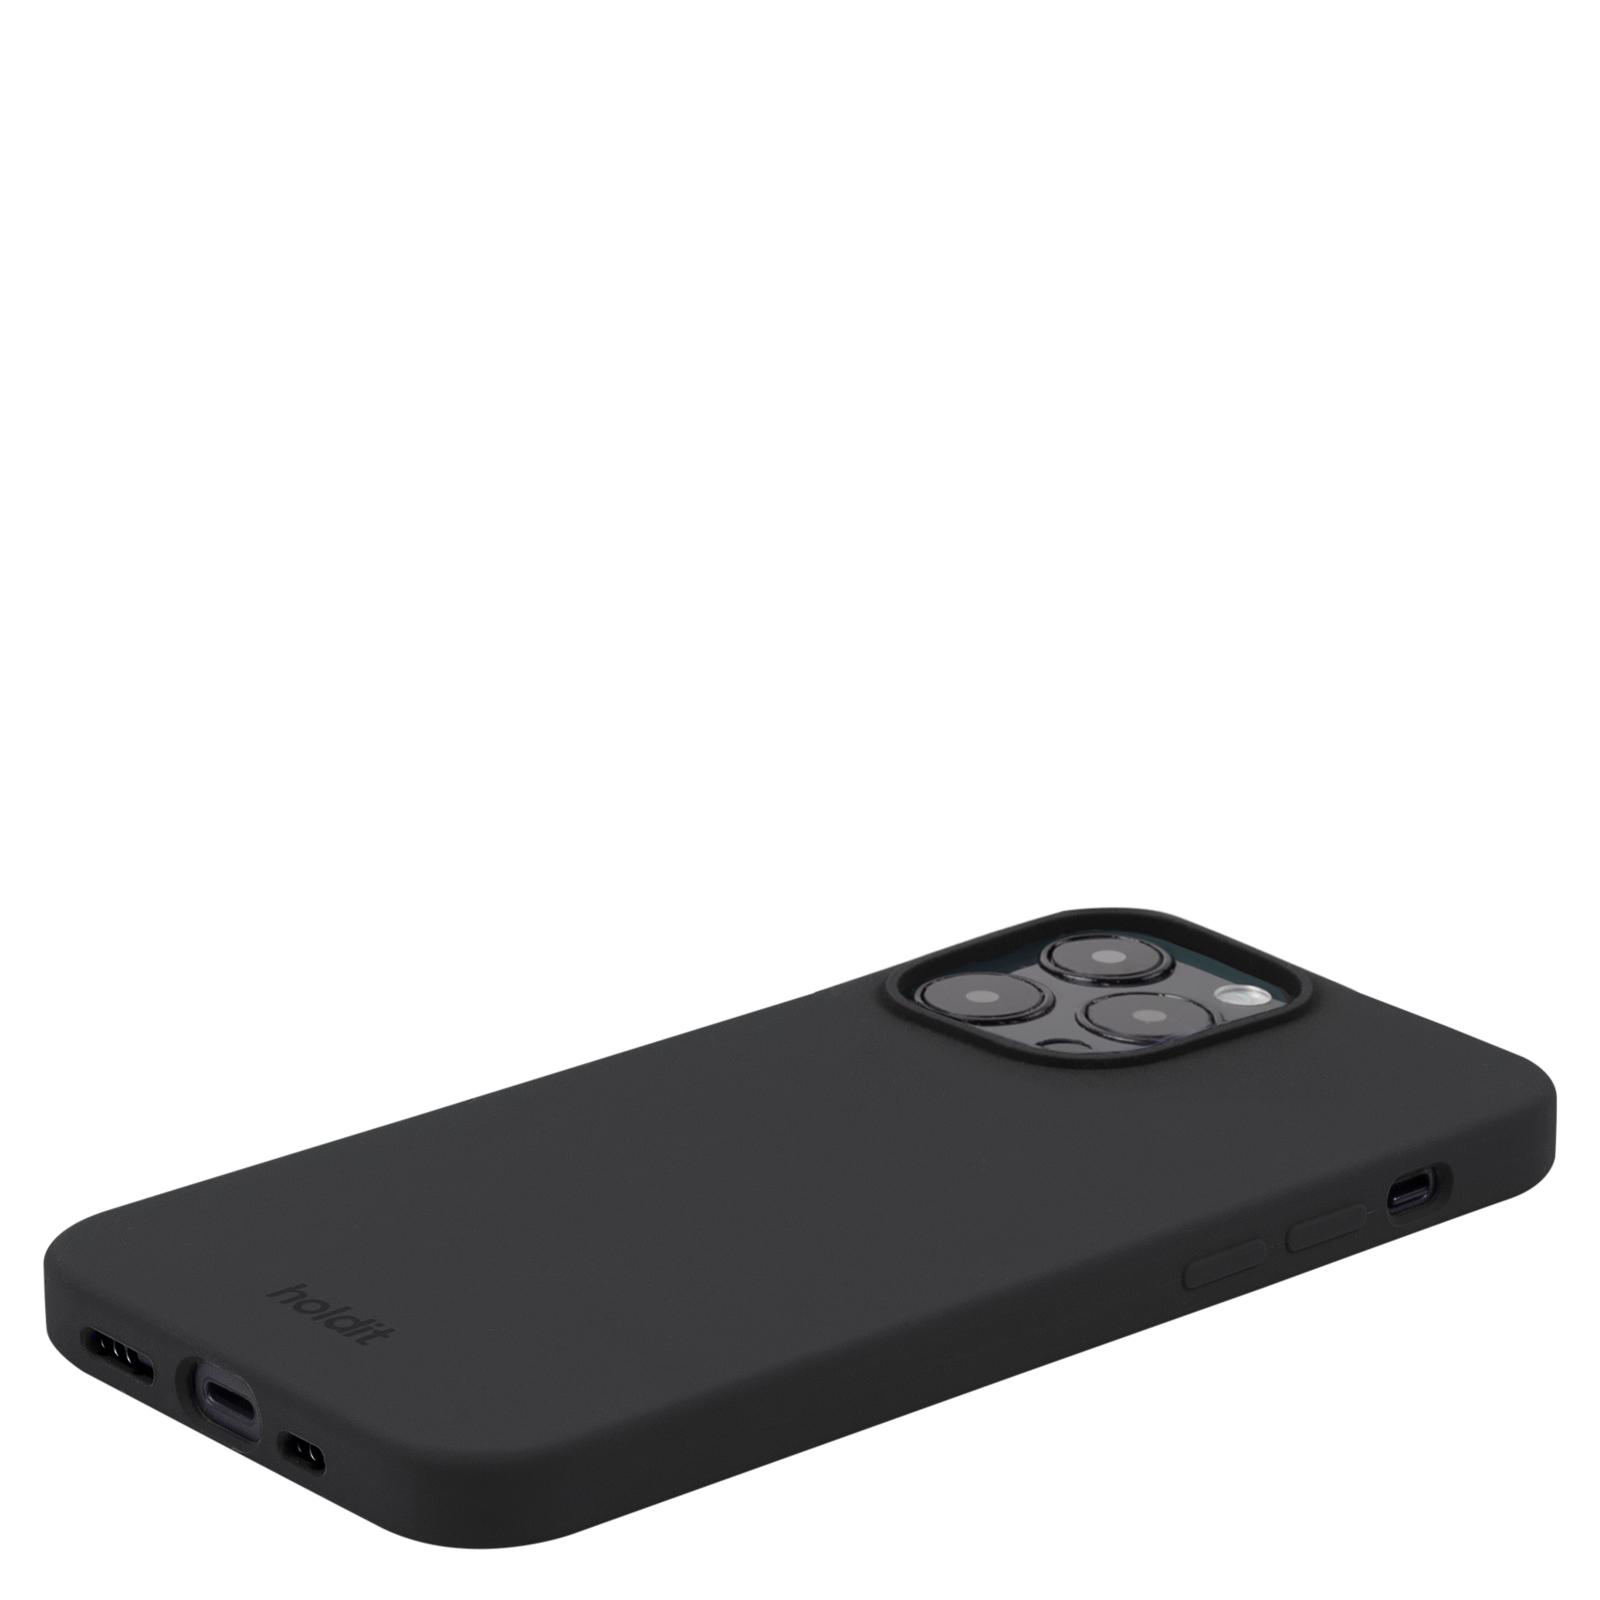 HOLDIT Silicone Case, Max, Apple, Black 14 Pro Backcover, iPhone